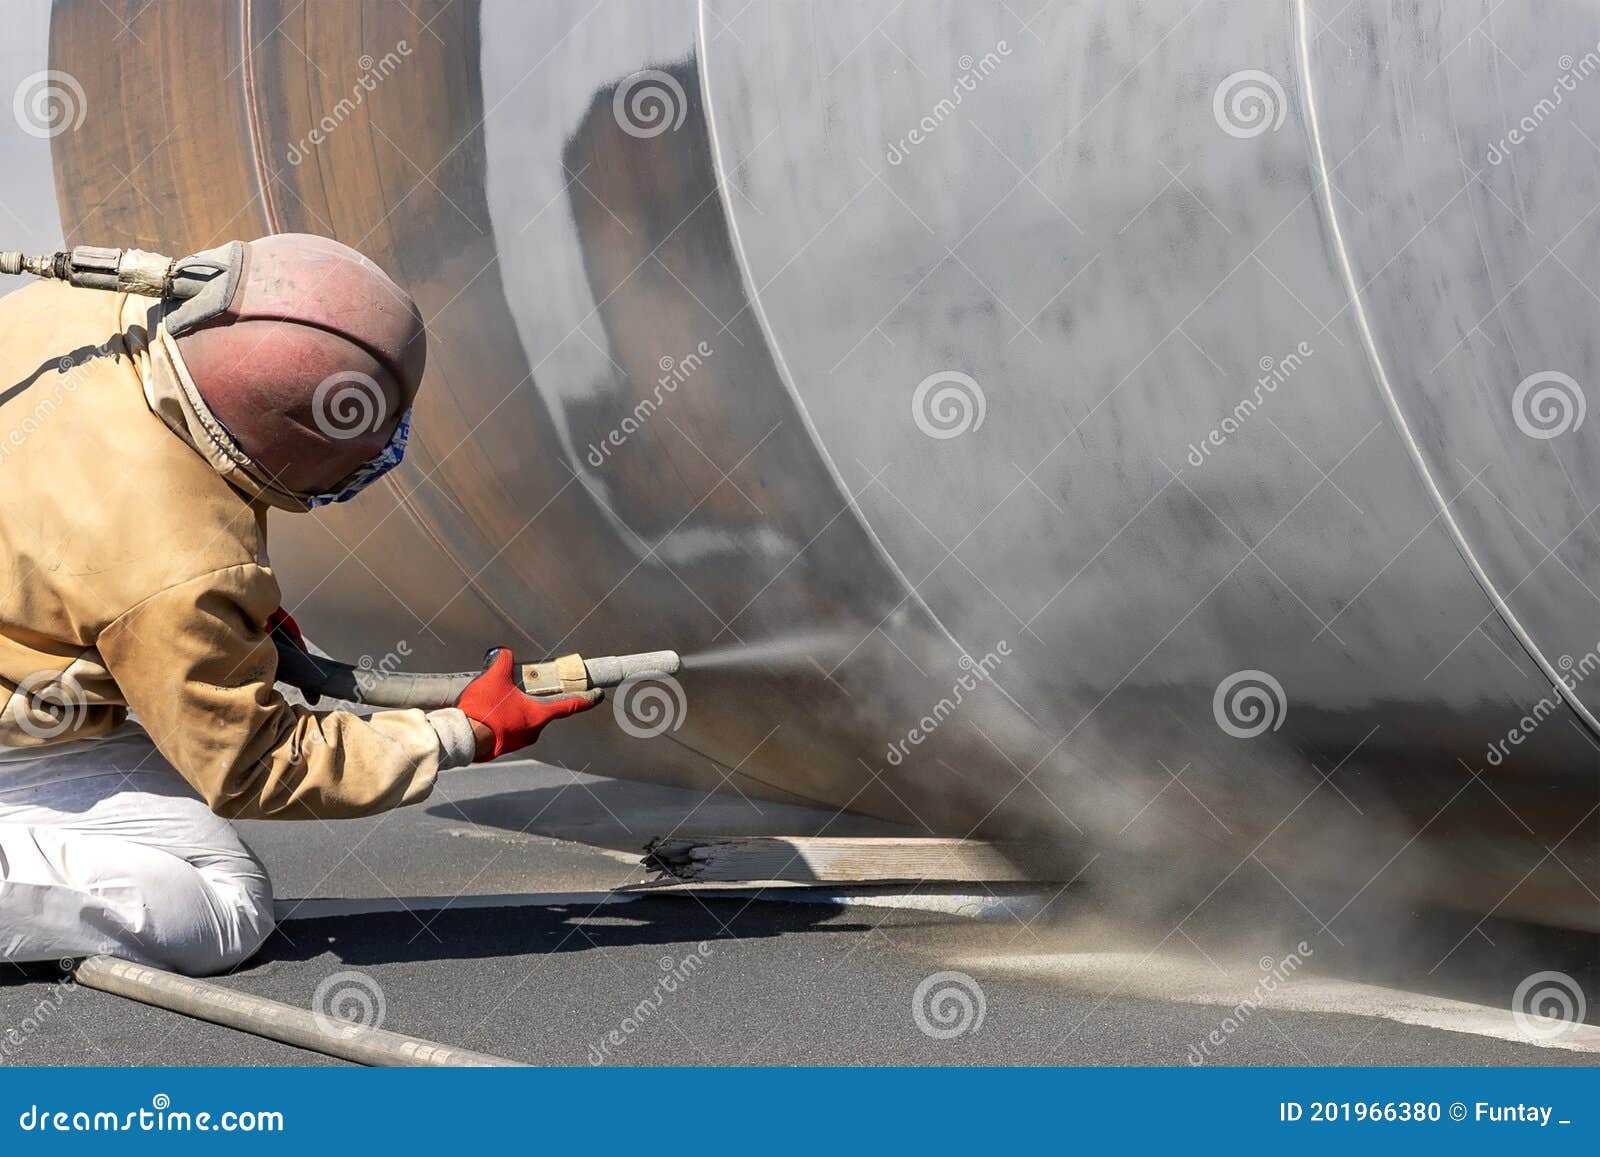 view of the manuel sandblasting to the large pipe. abrasive blasting more commonly known as sandblasting is the operation.